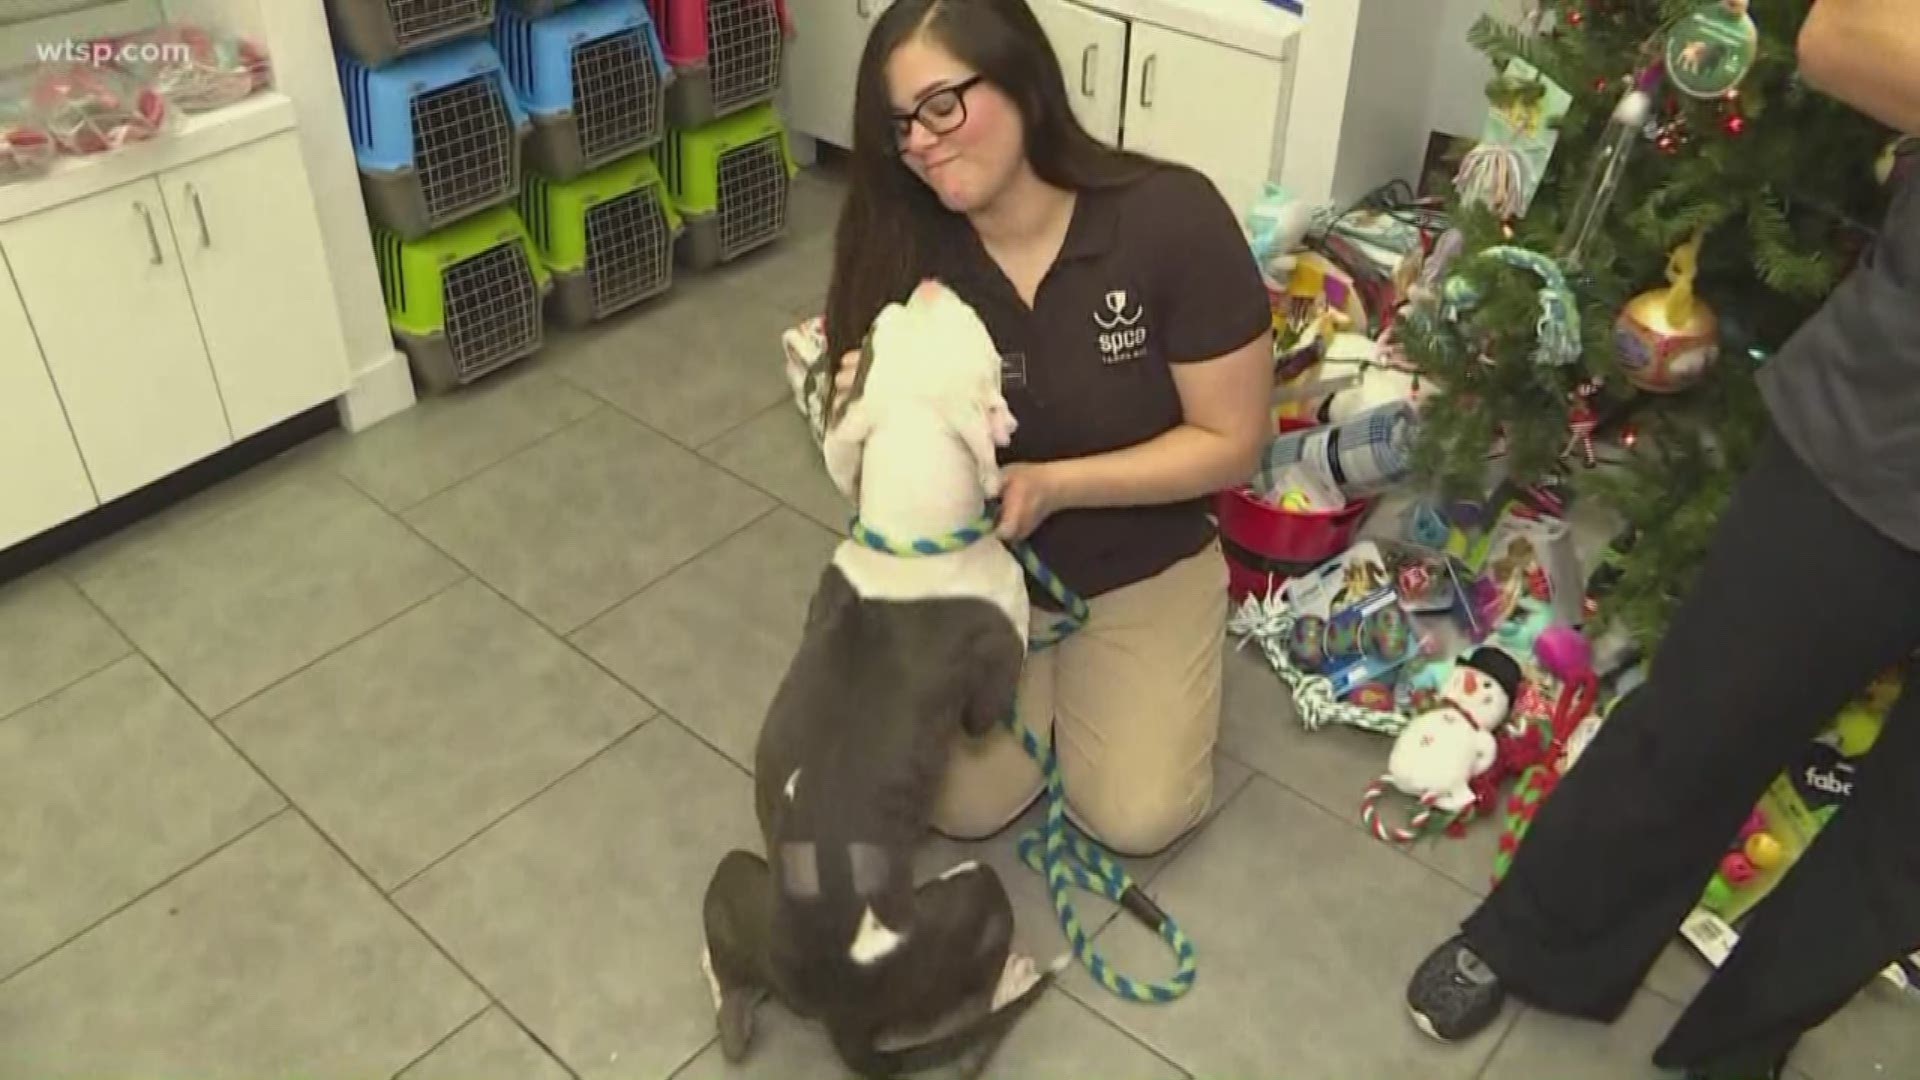 The animals at SPCA Tampa Bay don't have loving homes to go to, but thanks for the Fa-la-la-la Foster program, they'll have temporary families for Christmas Eve and